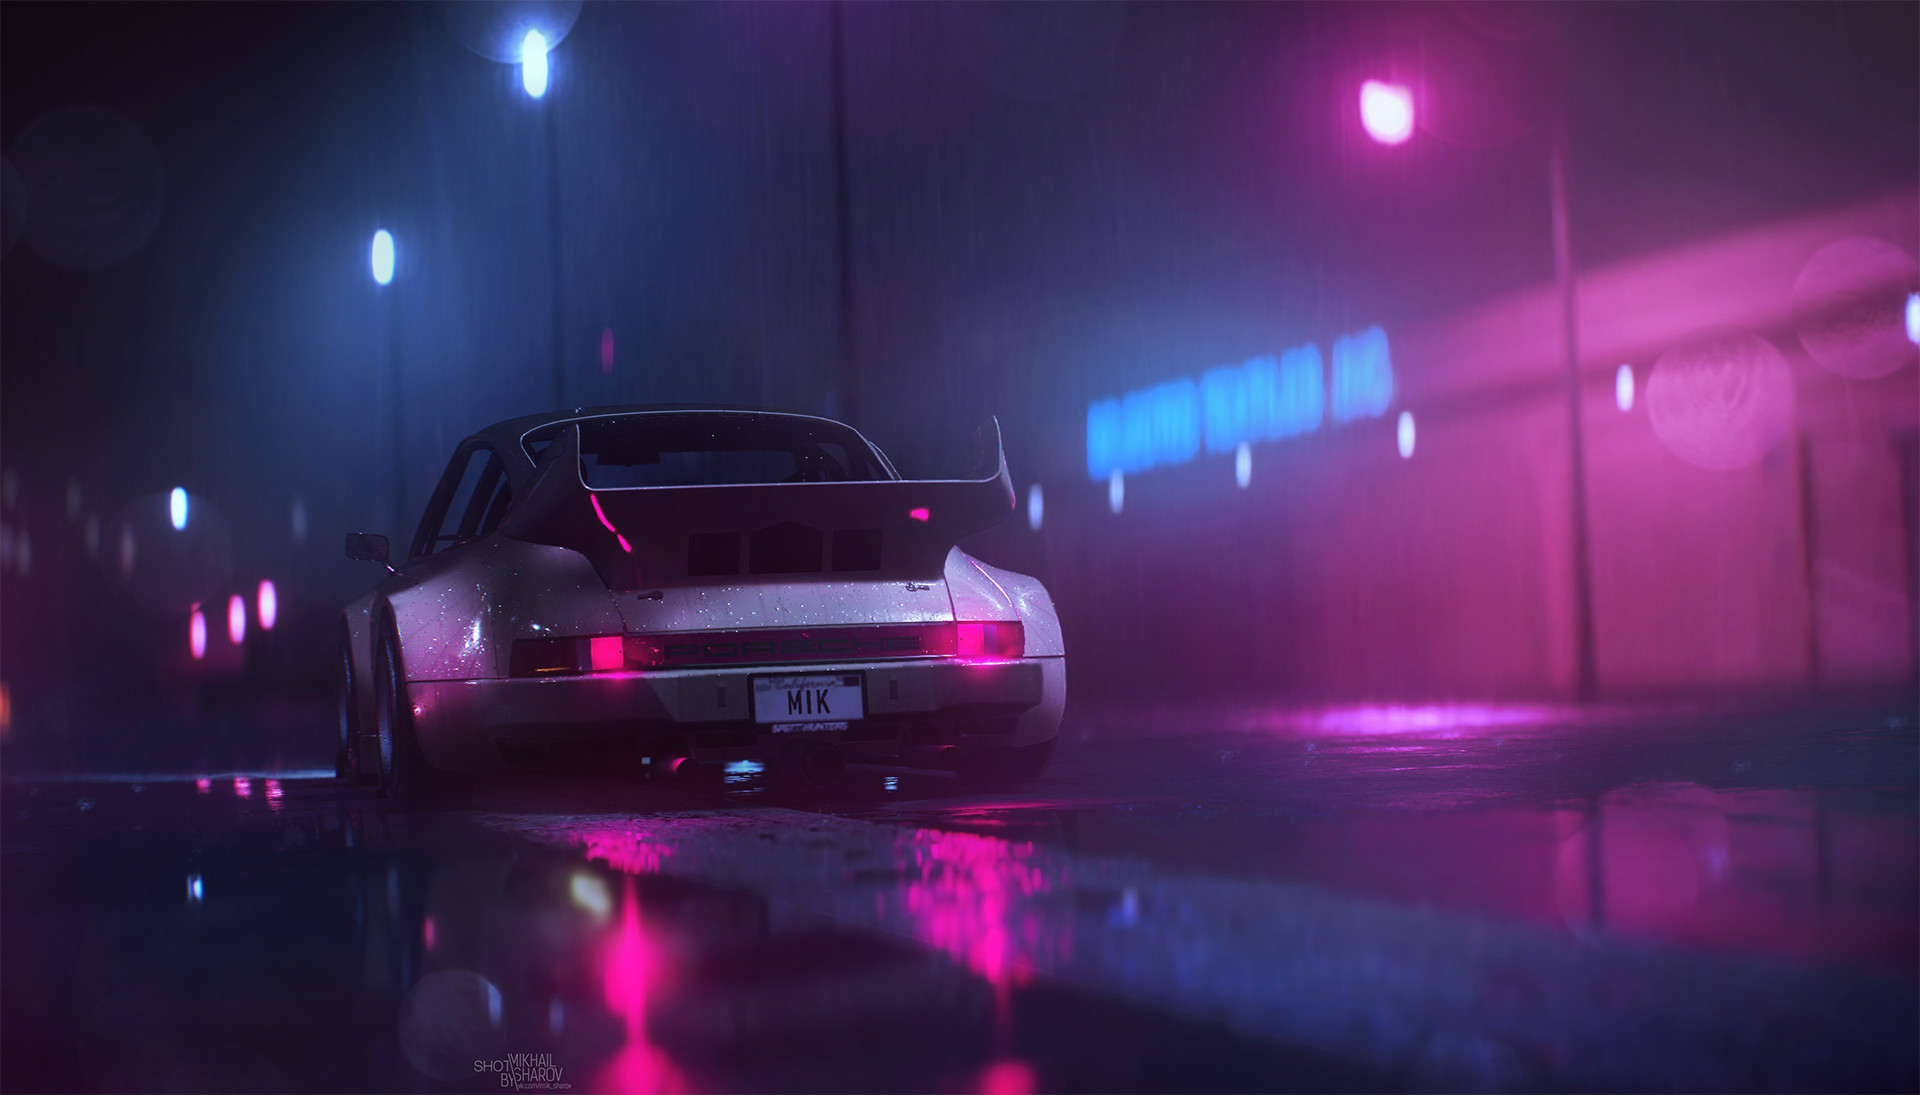 Some of the best new Retrowave / Synthwave wallpapers and artwork